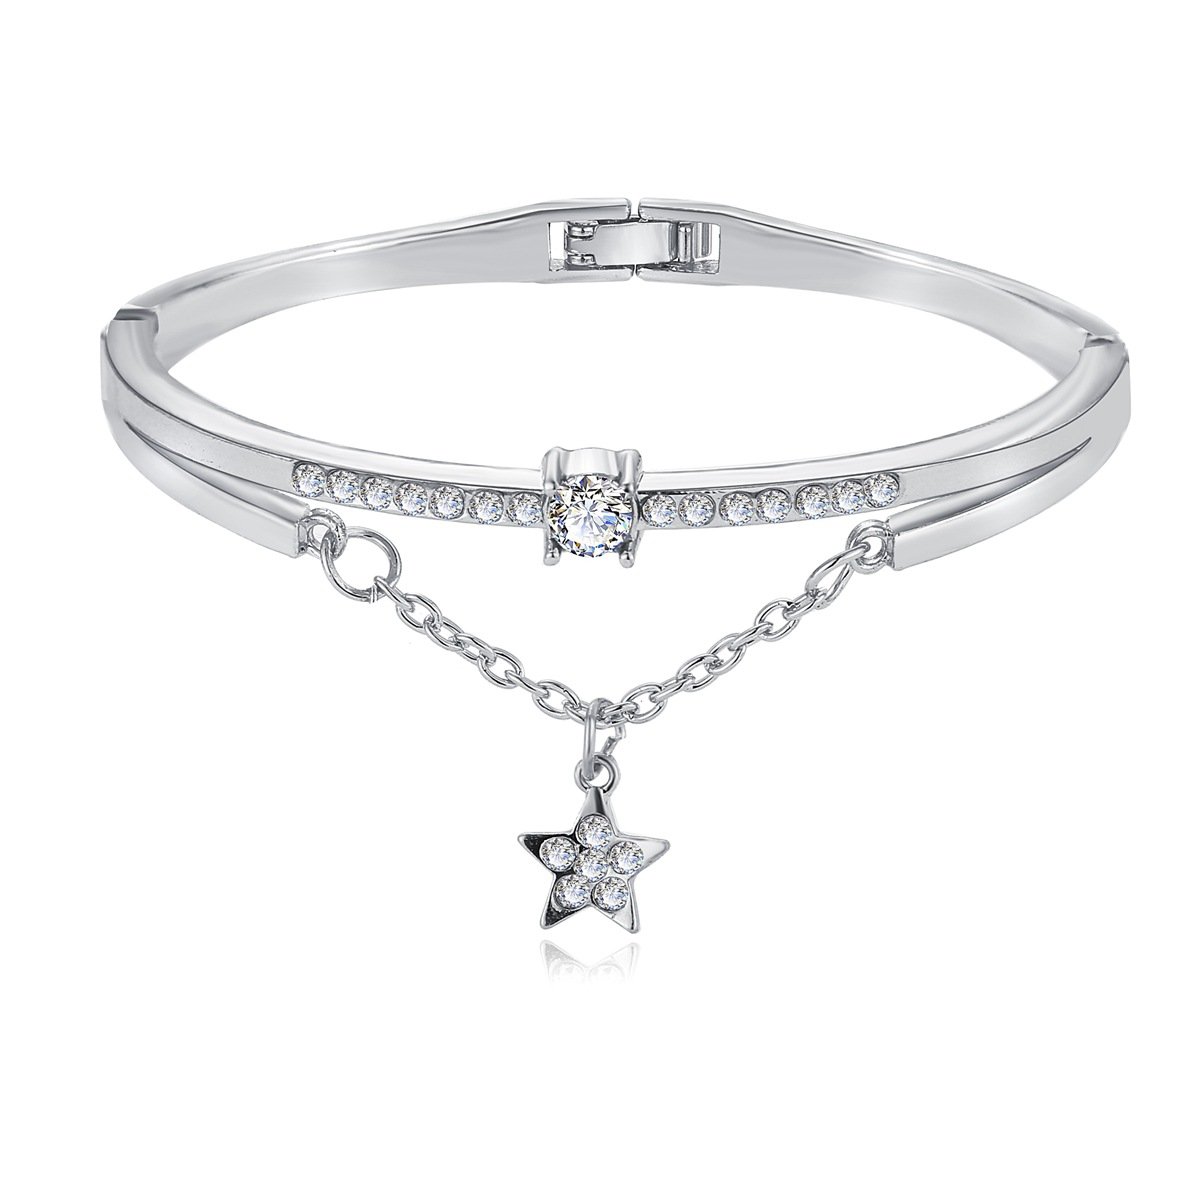 Picture of Alily Jewelry HZS-B0488-SILVER Star Drop Bracelet with Austrian Crystals in 18K White Gold Plated